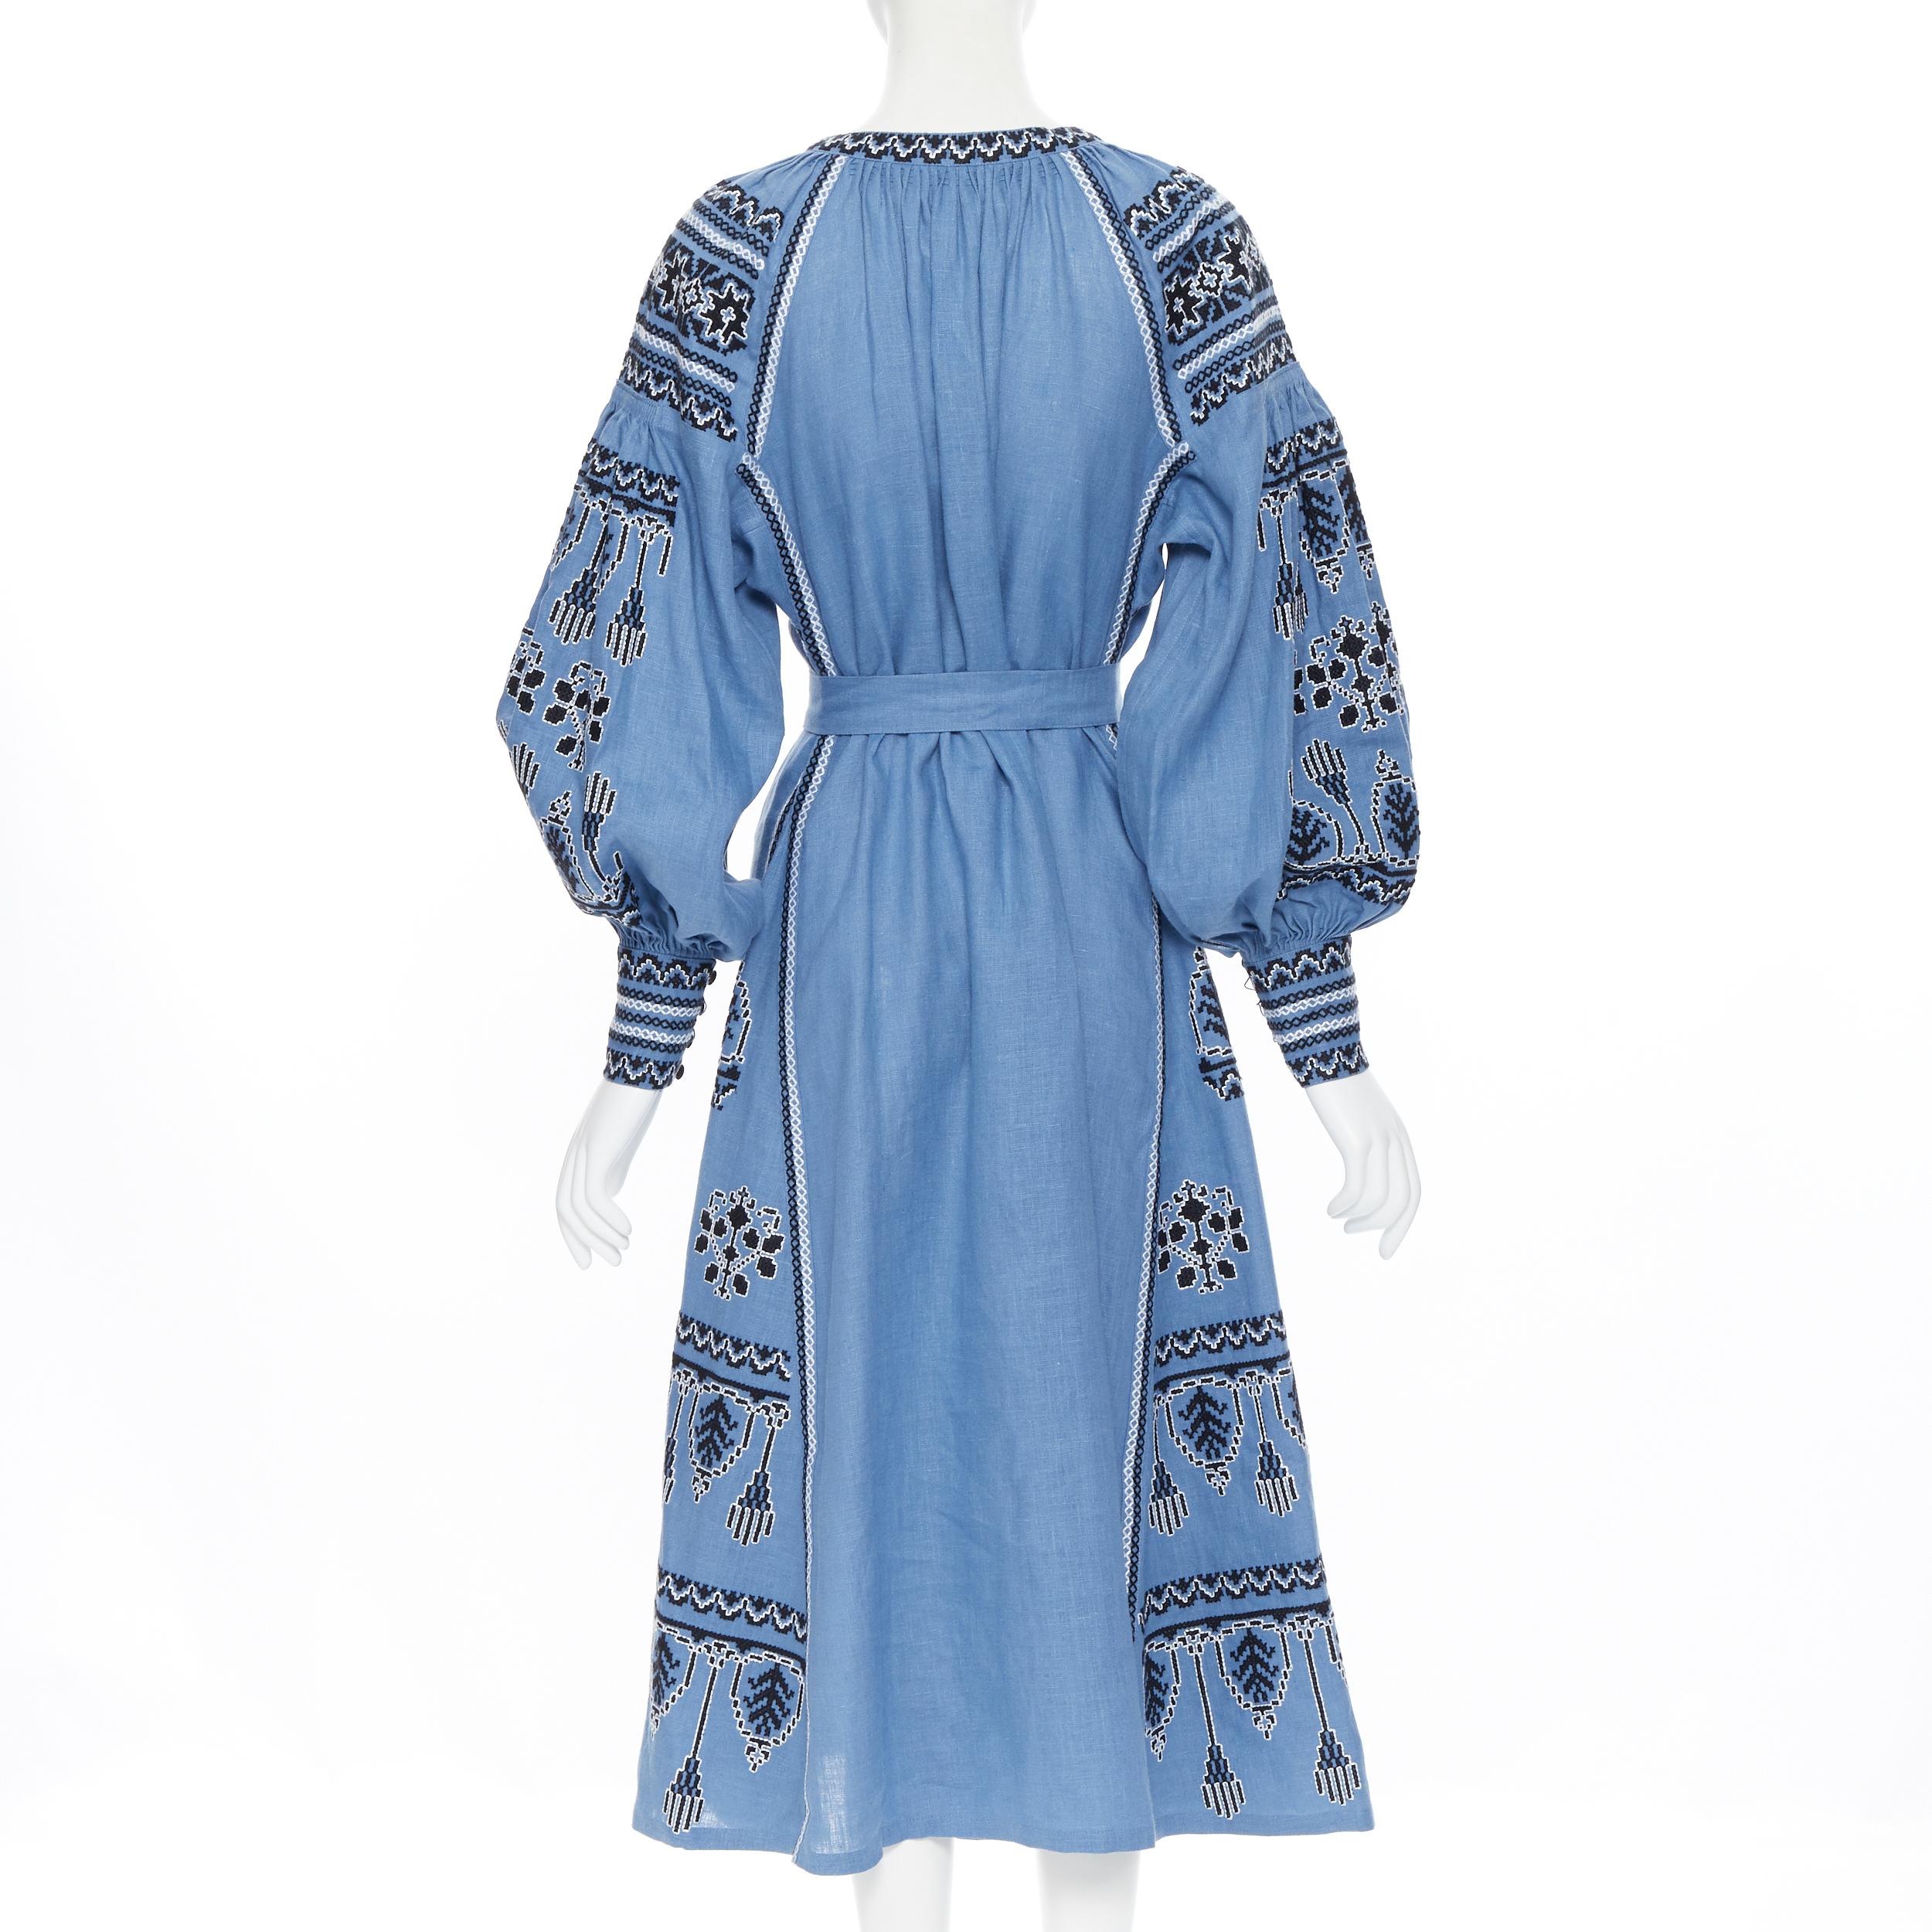 Blue VITA KIN blue linen black white ethnic embroidered puff sleeve belted dress XS